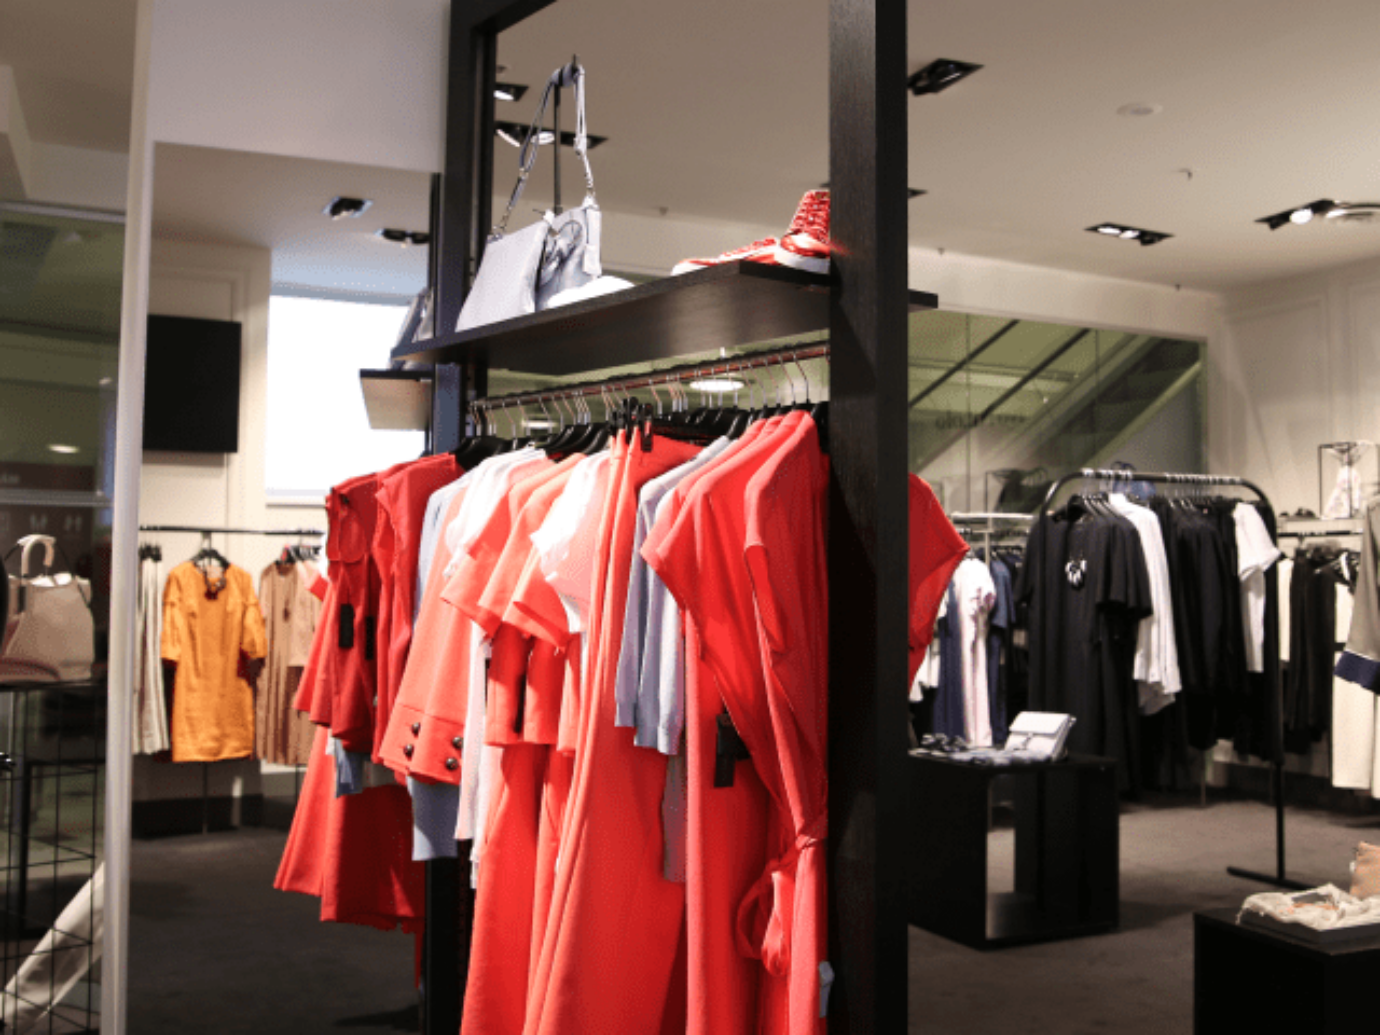 The image shows a clothing rack in an apparel store.